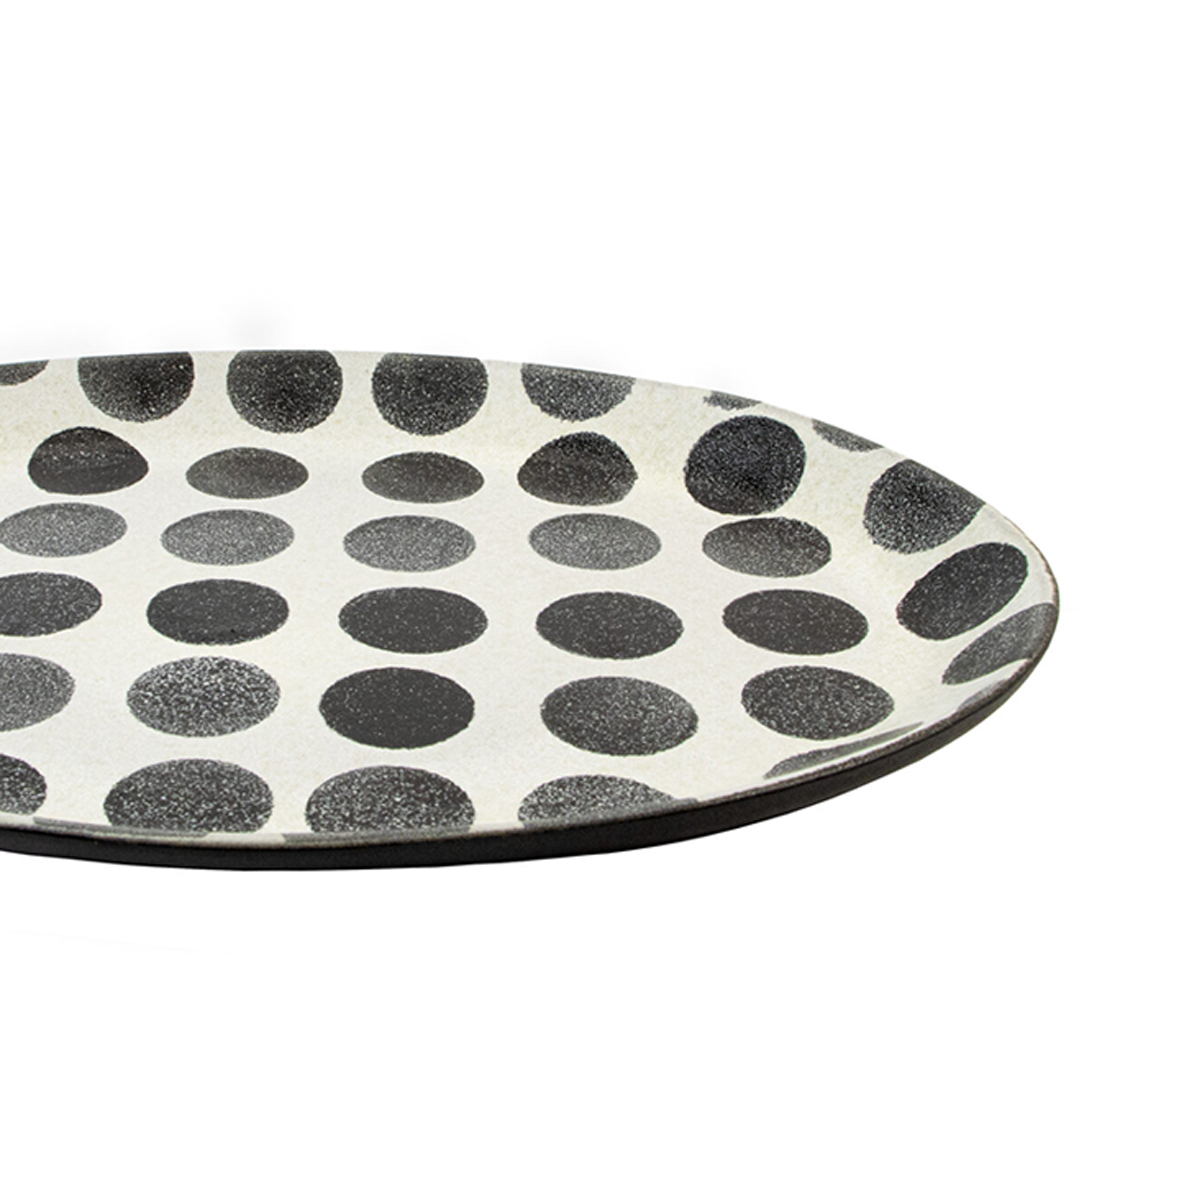 DARQUE SMALL SPOTTED PLATTER 